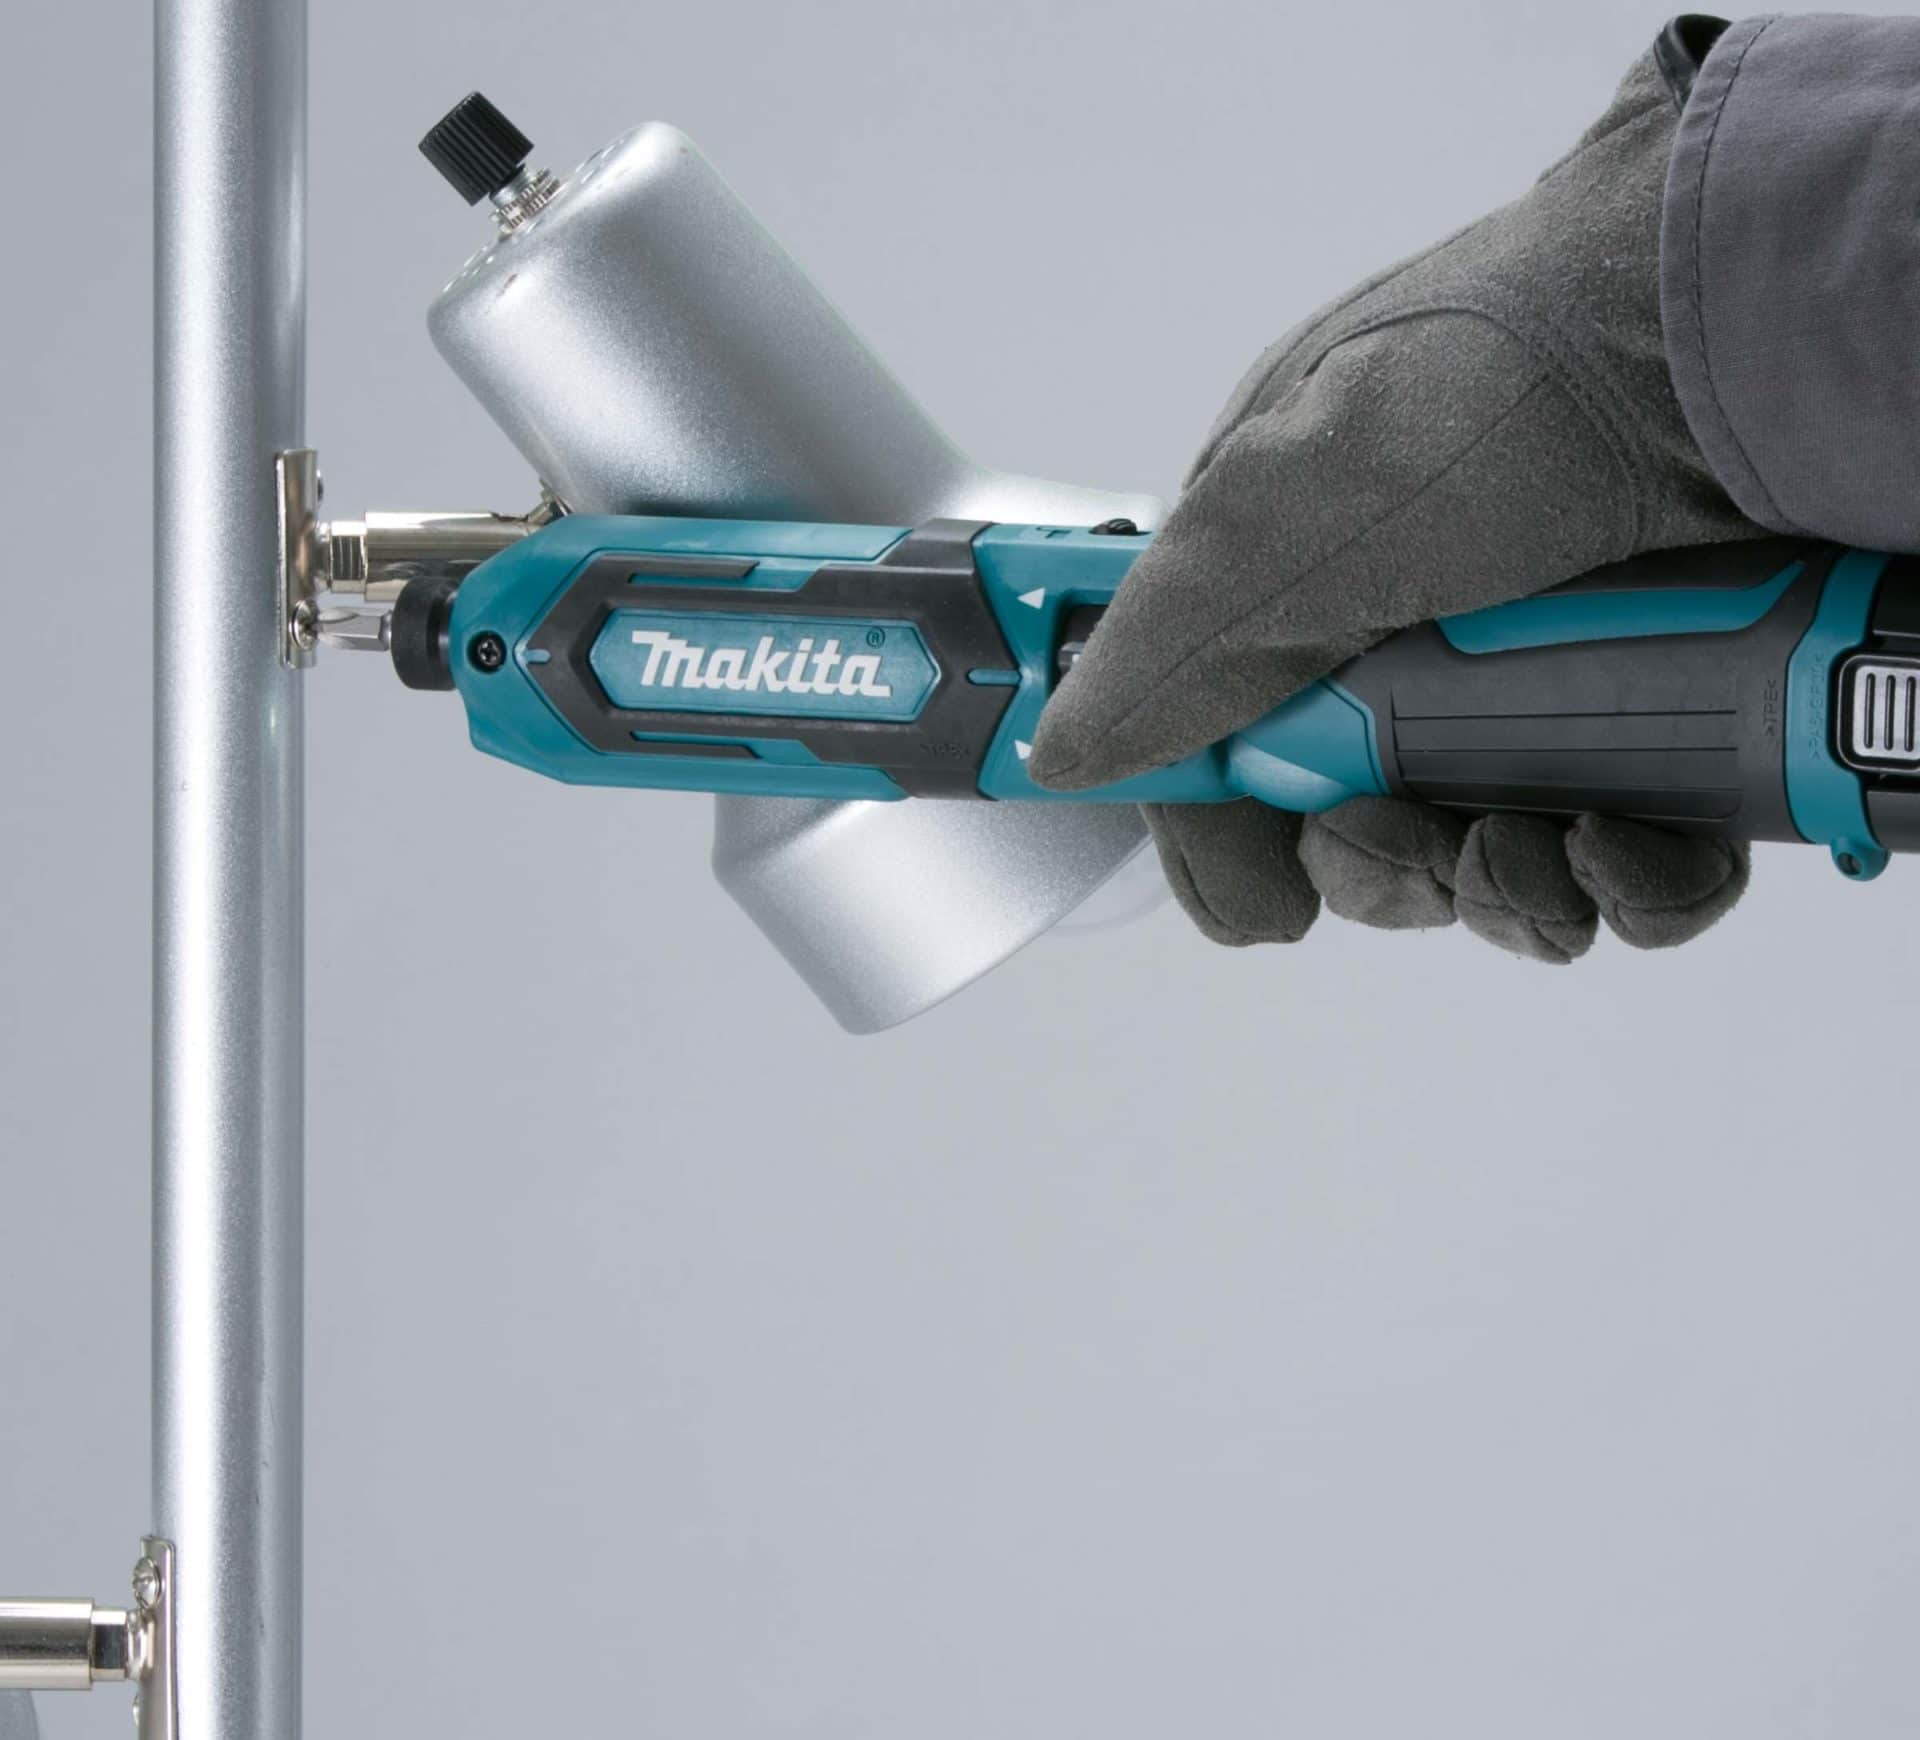 Makita’s latest pencil driver has more features and power